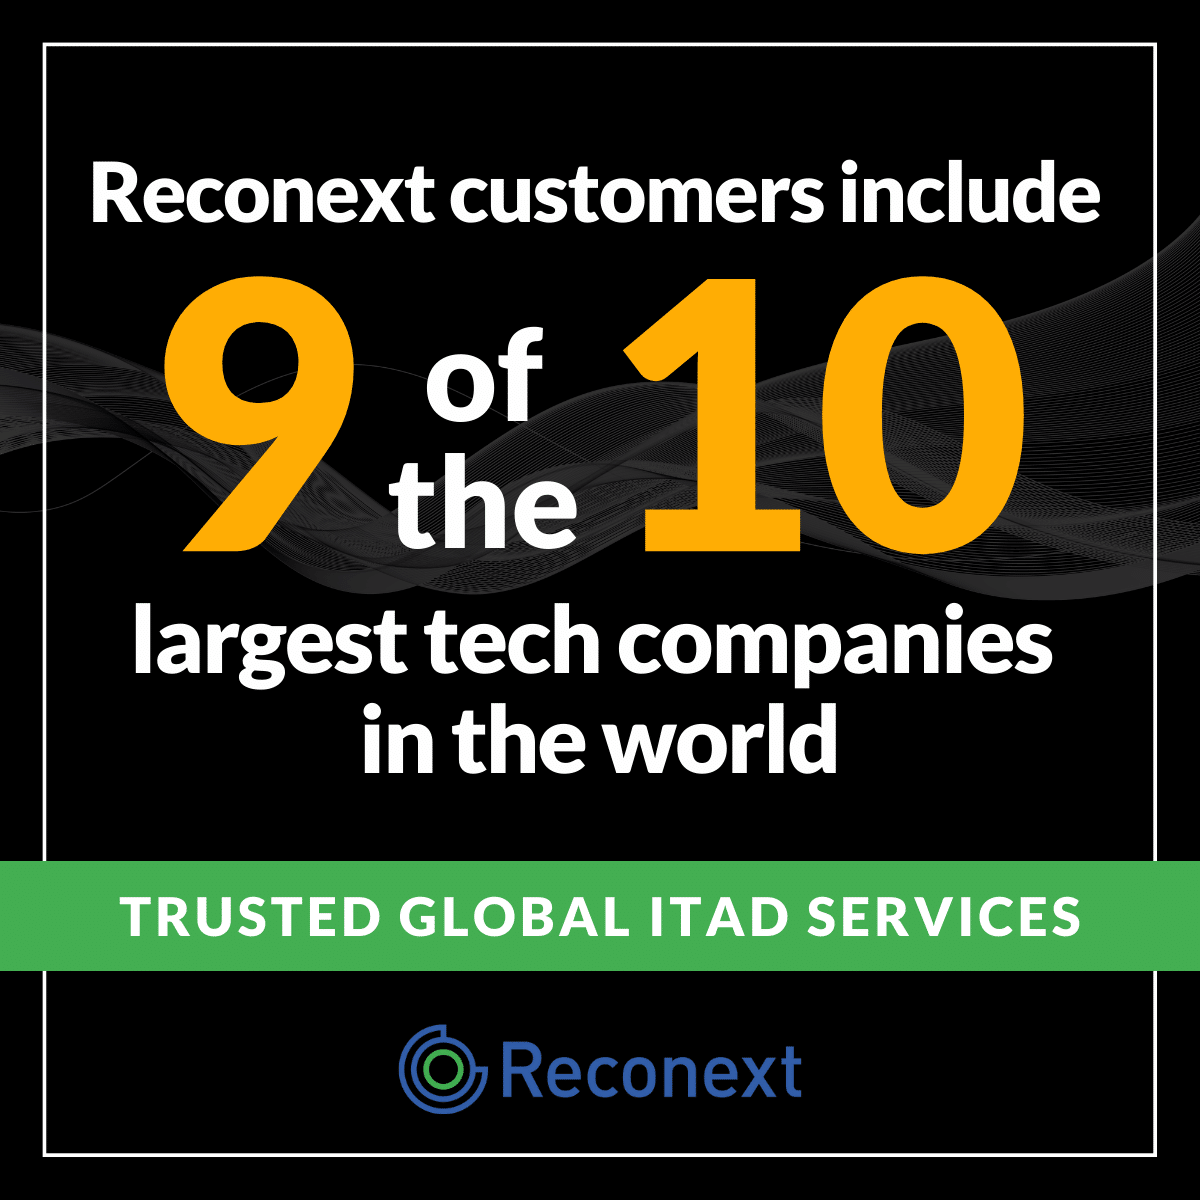 Reconext customers include 9 of the 10 largest tech companies in the world